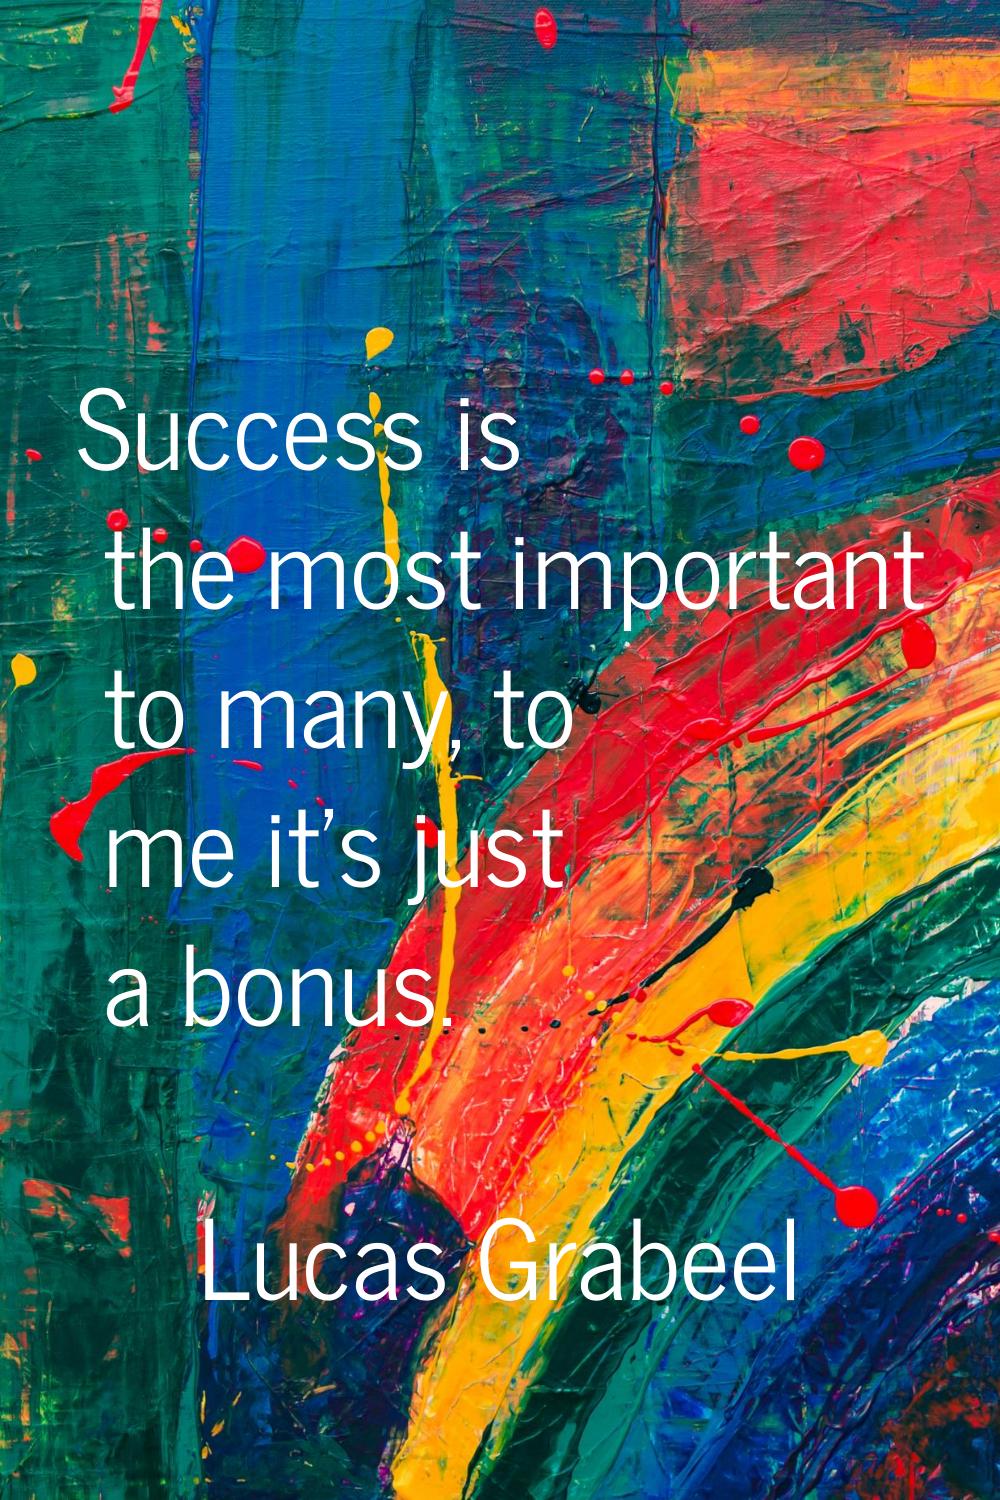 Success is the most important to many, to me it's just a bonus.